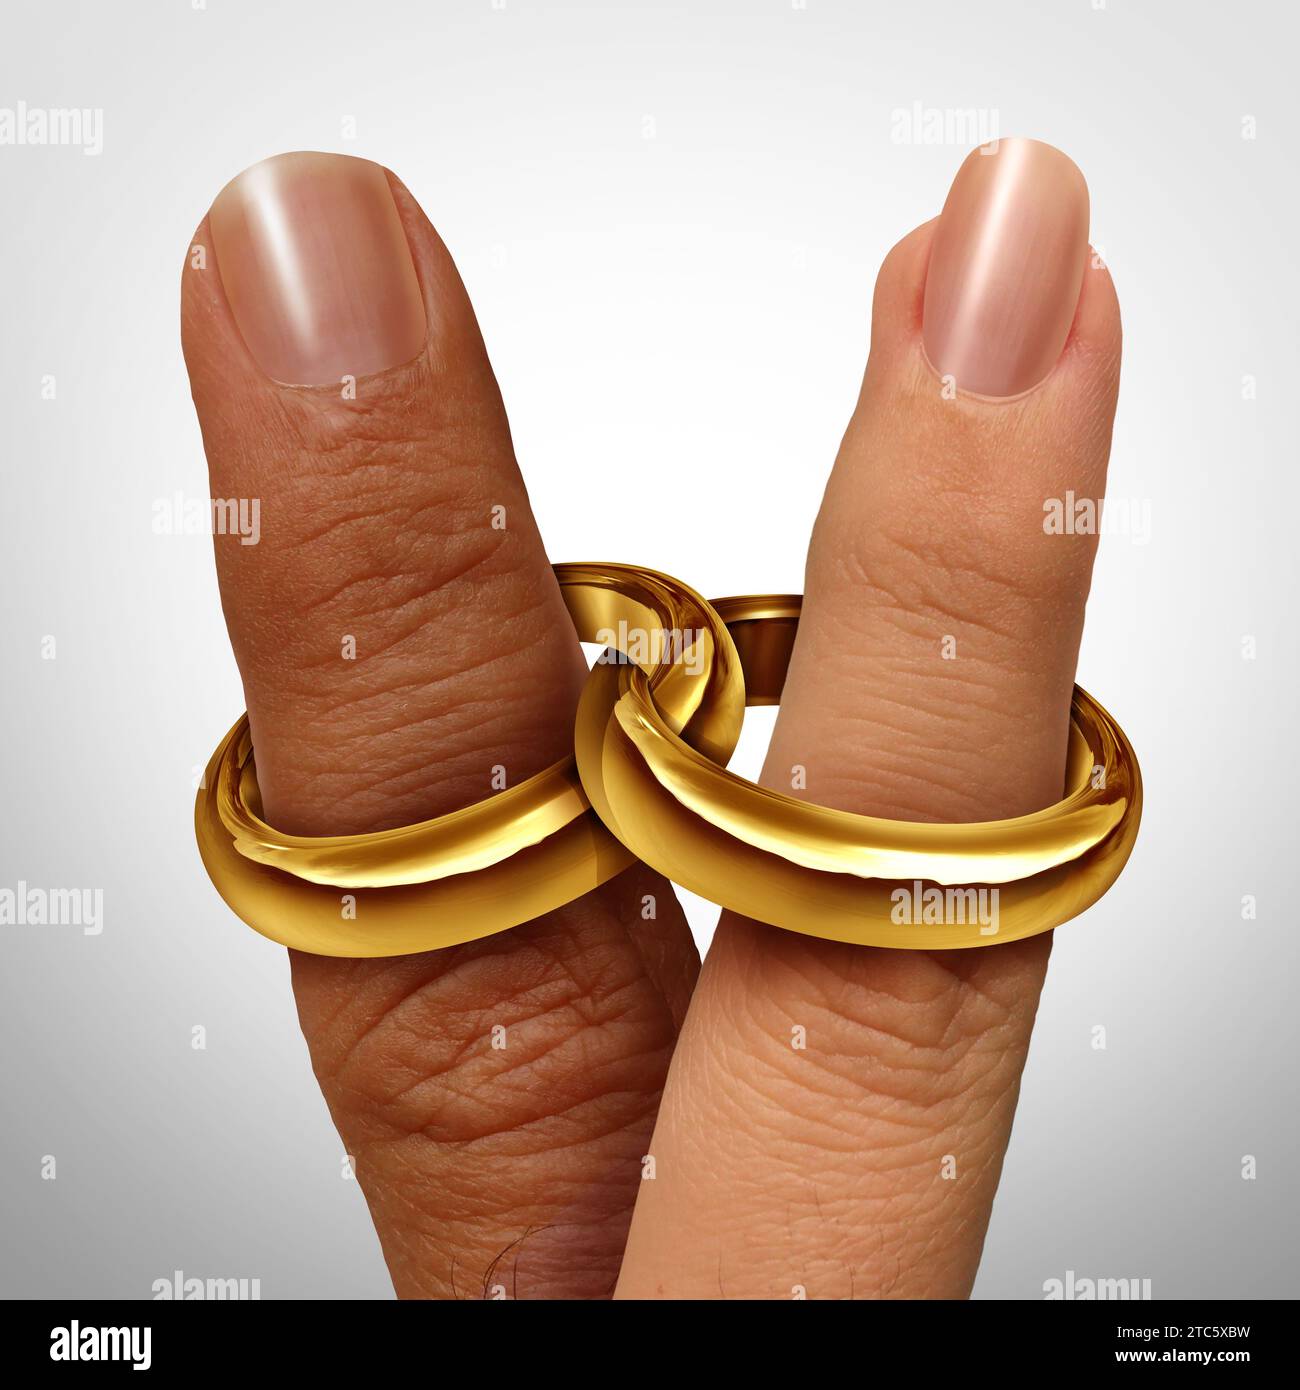 Marriage Concept and relationship union as a couples therapy idea or two people married together linked by wedding rings as a partnership trap or life Stock Photo